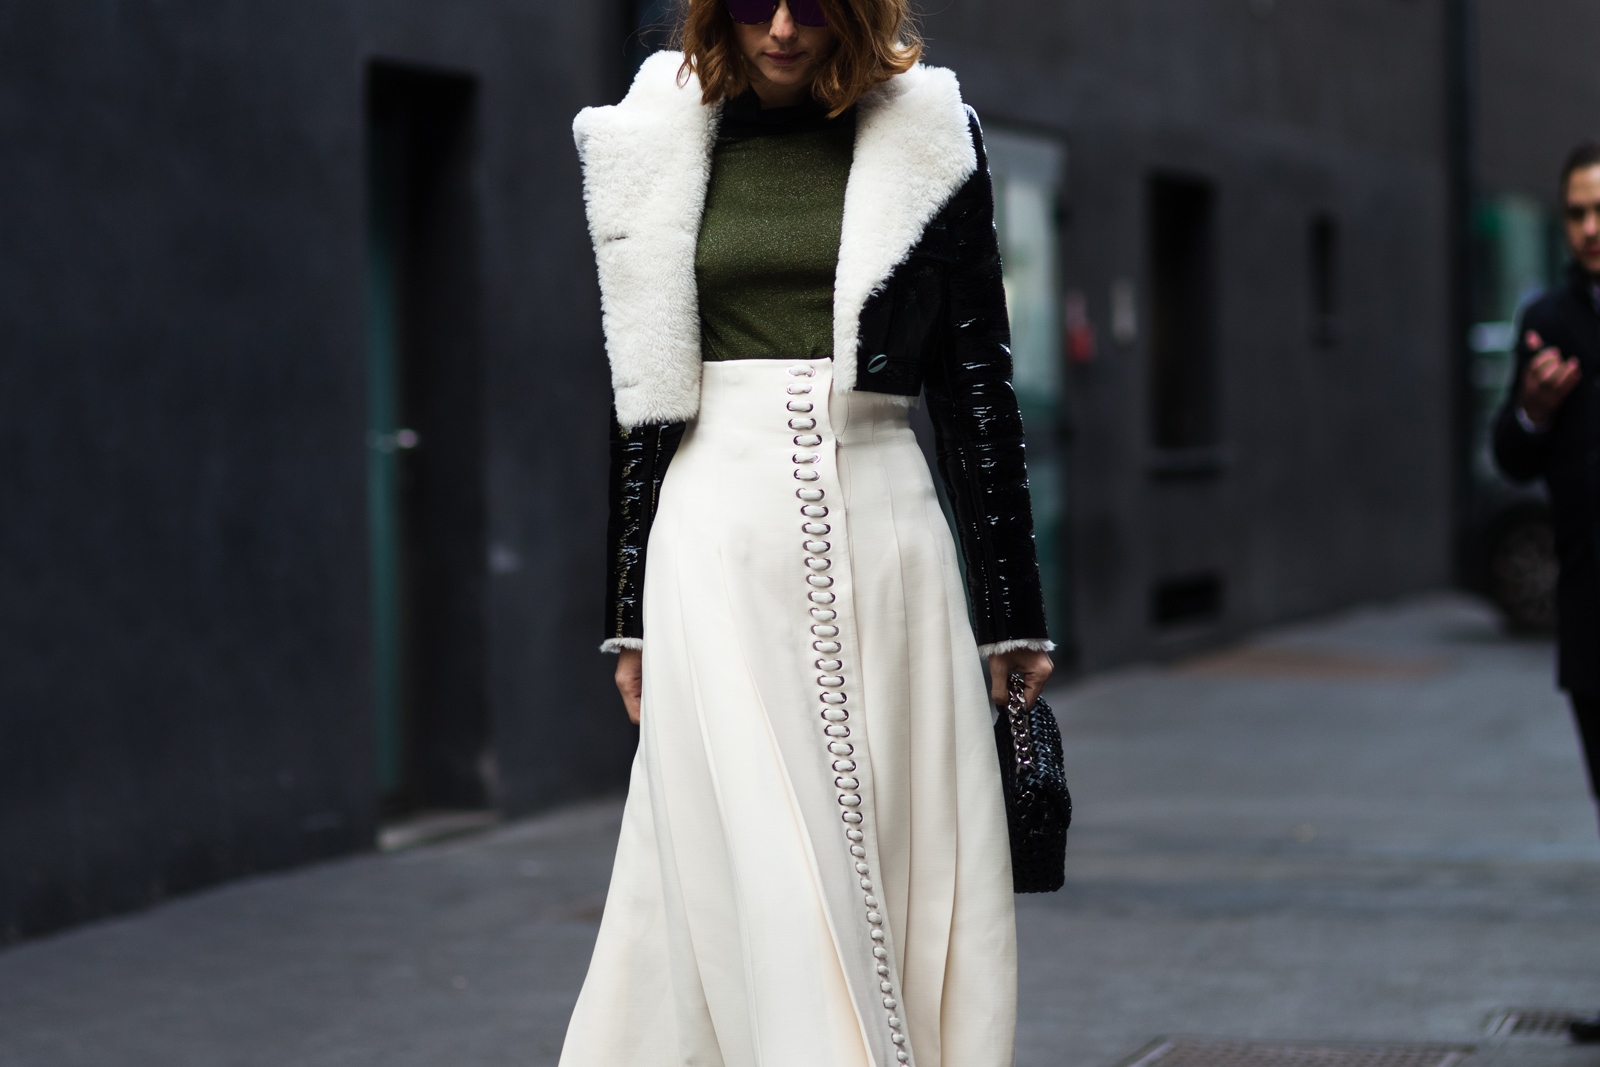 Candela Novembre wearing a Fendi skirt and a cropped jacket before a show in Milan, Italy